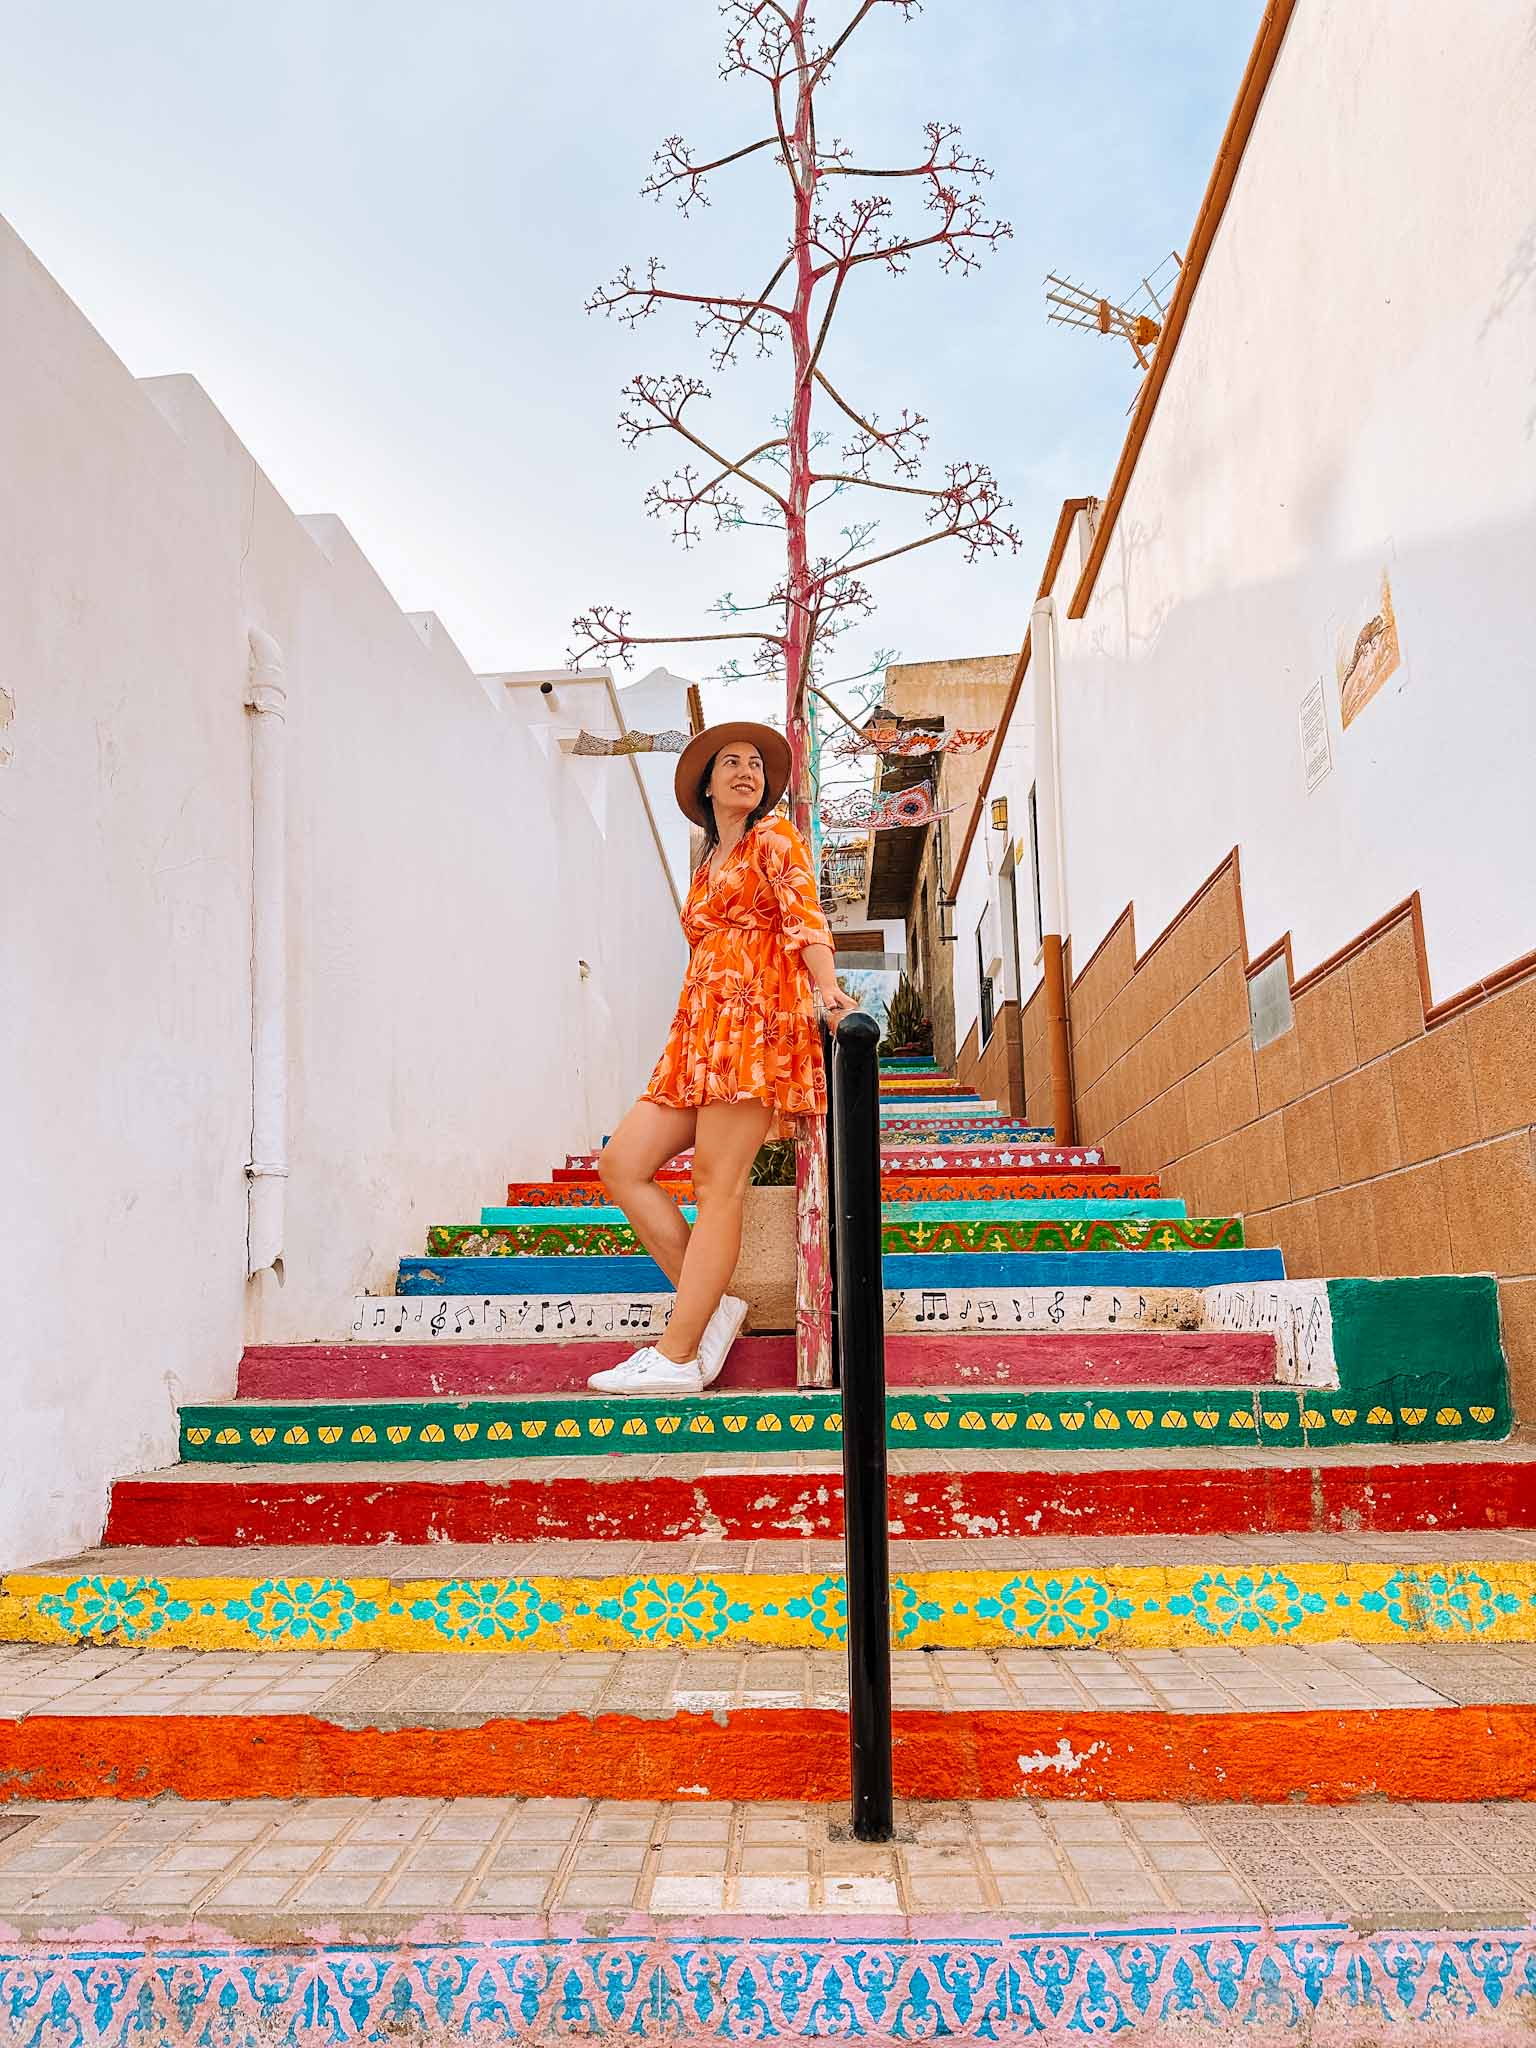 Vicar village, Almeria - things to do in the most colorful village in Andalusia, Spain